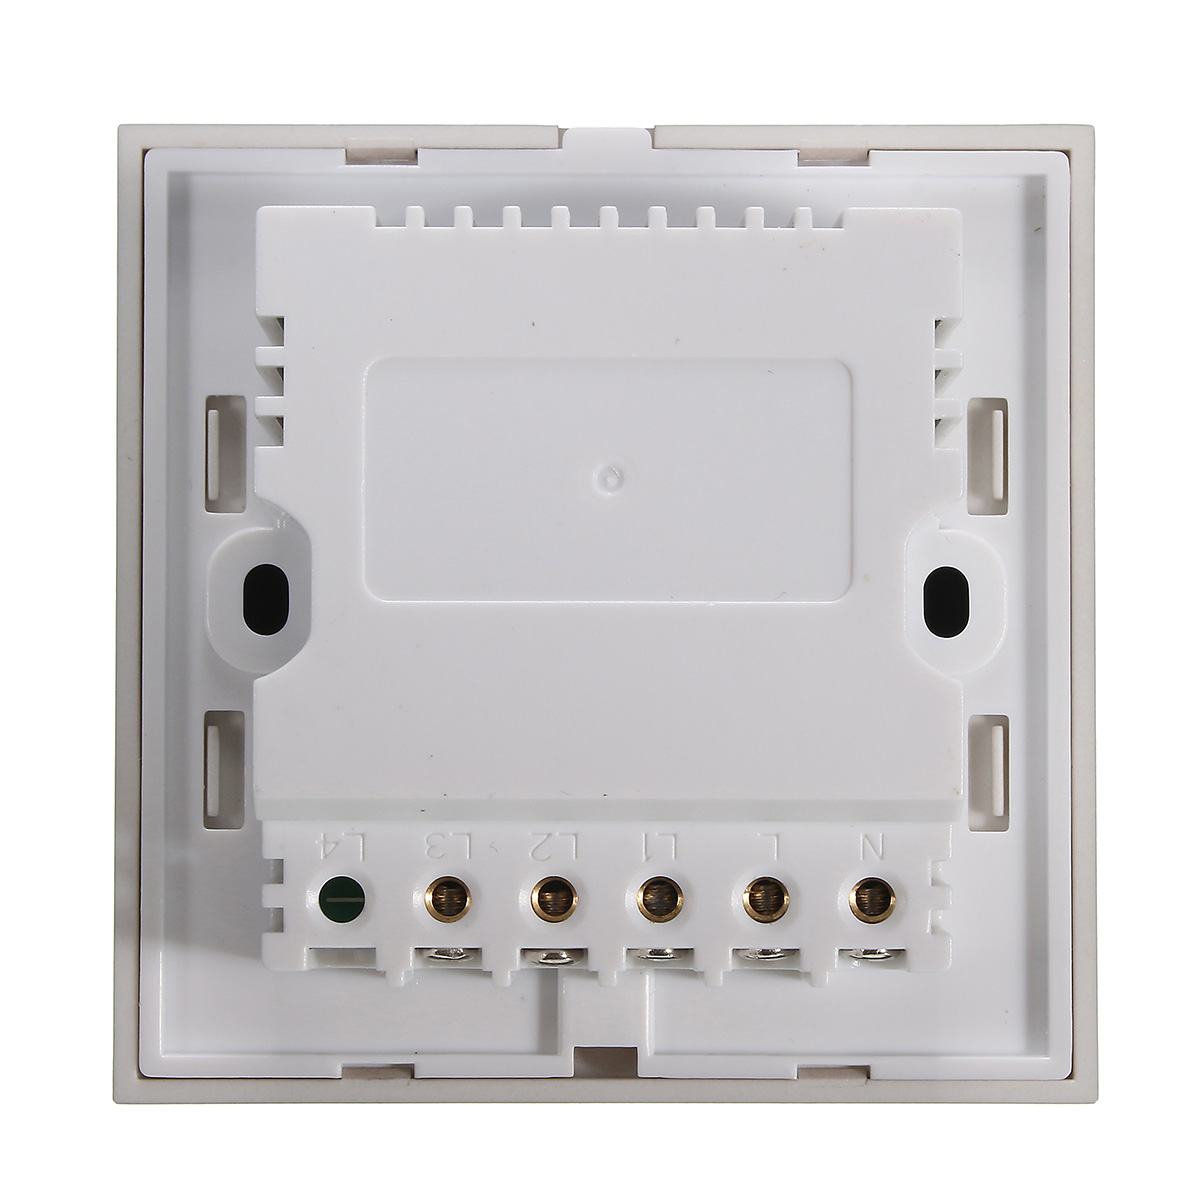 AC-100V-250V-Smart-WiFi-Socket-Remote-Control-Intelligent-Touch-Switch-Wall-Socket-Switch-1286797-10